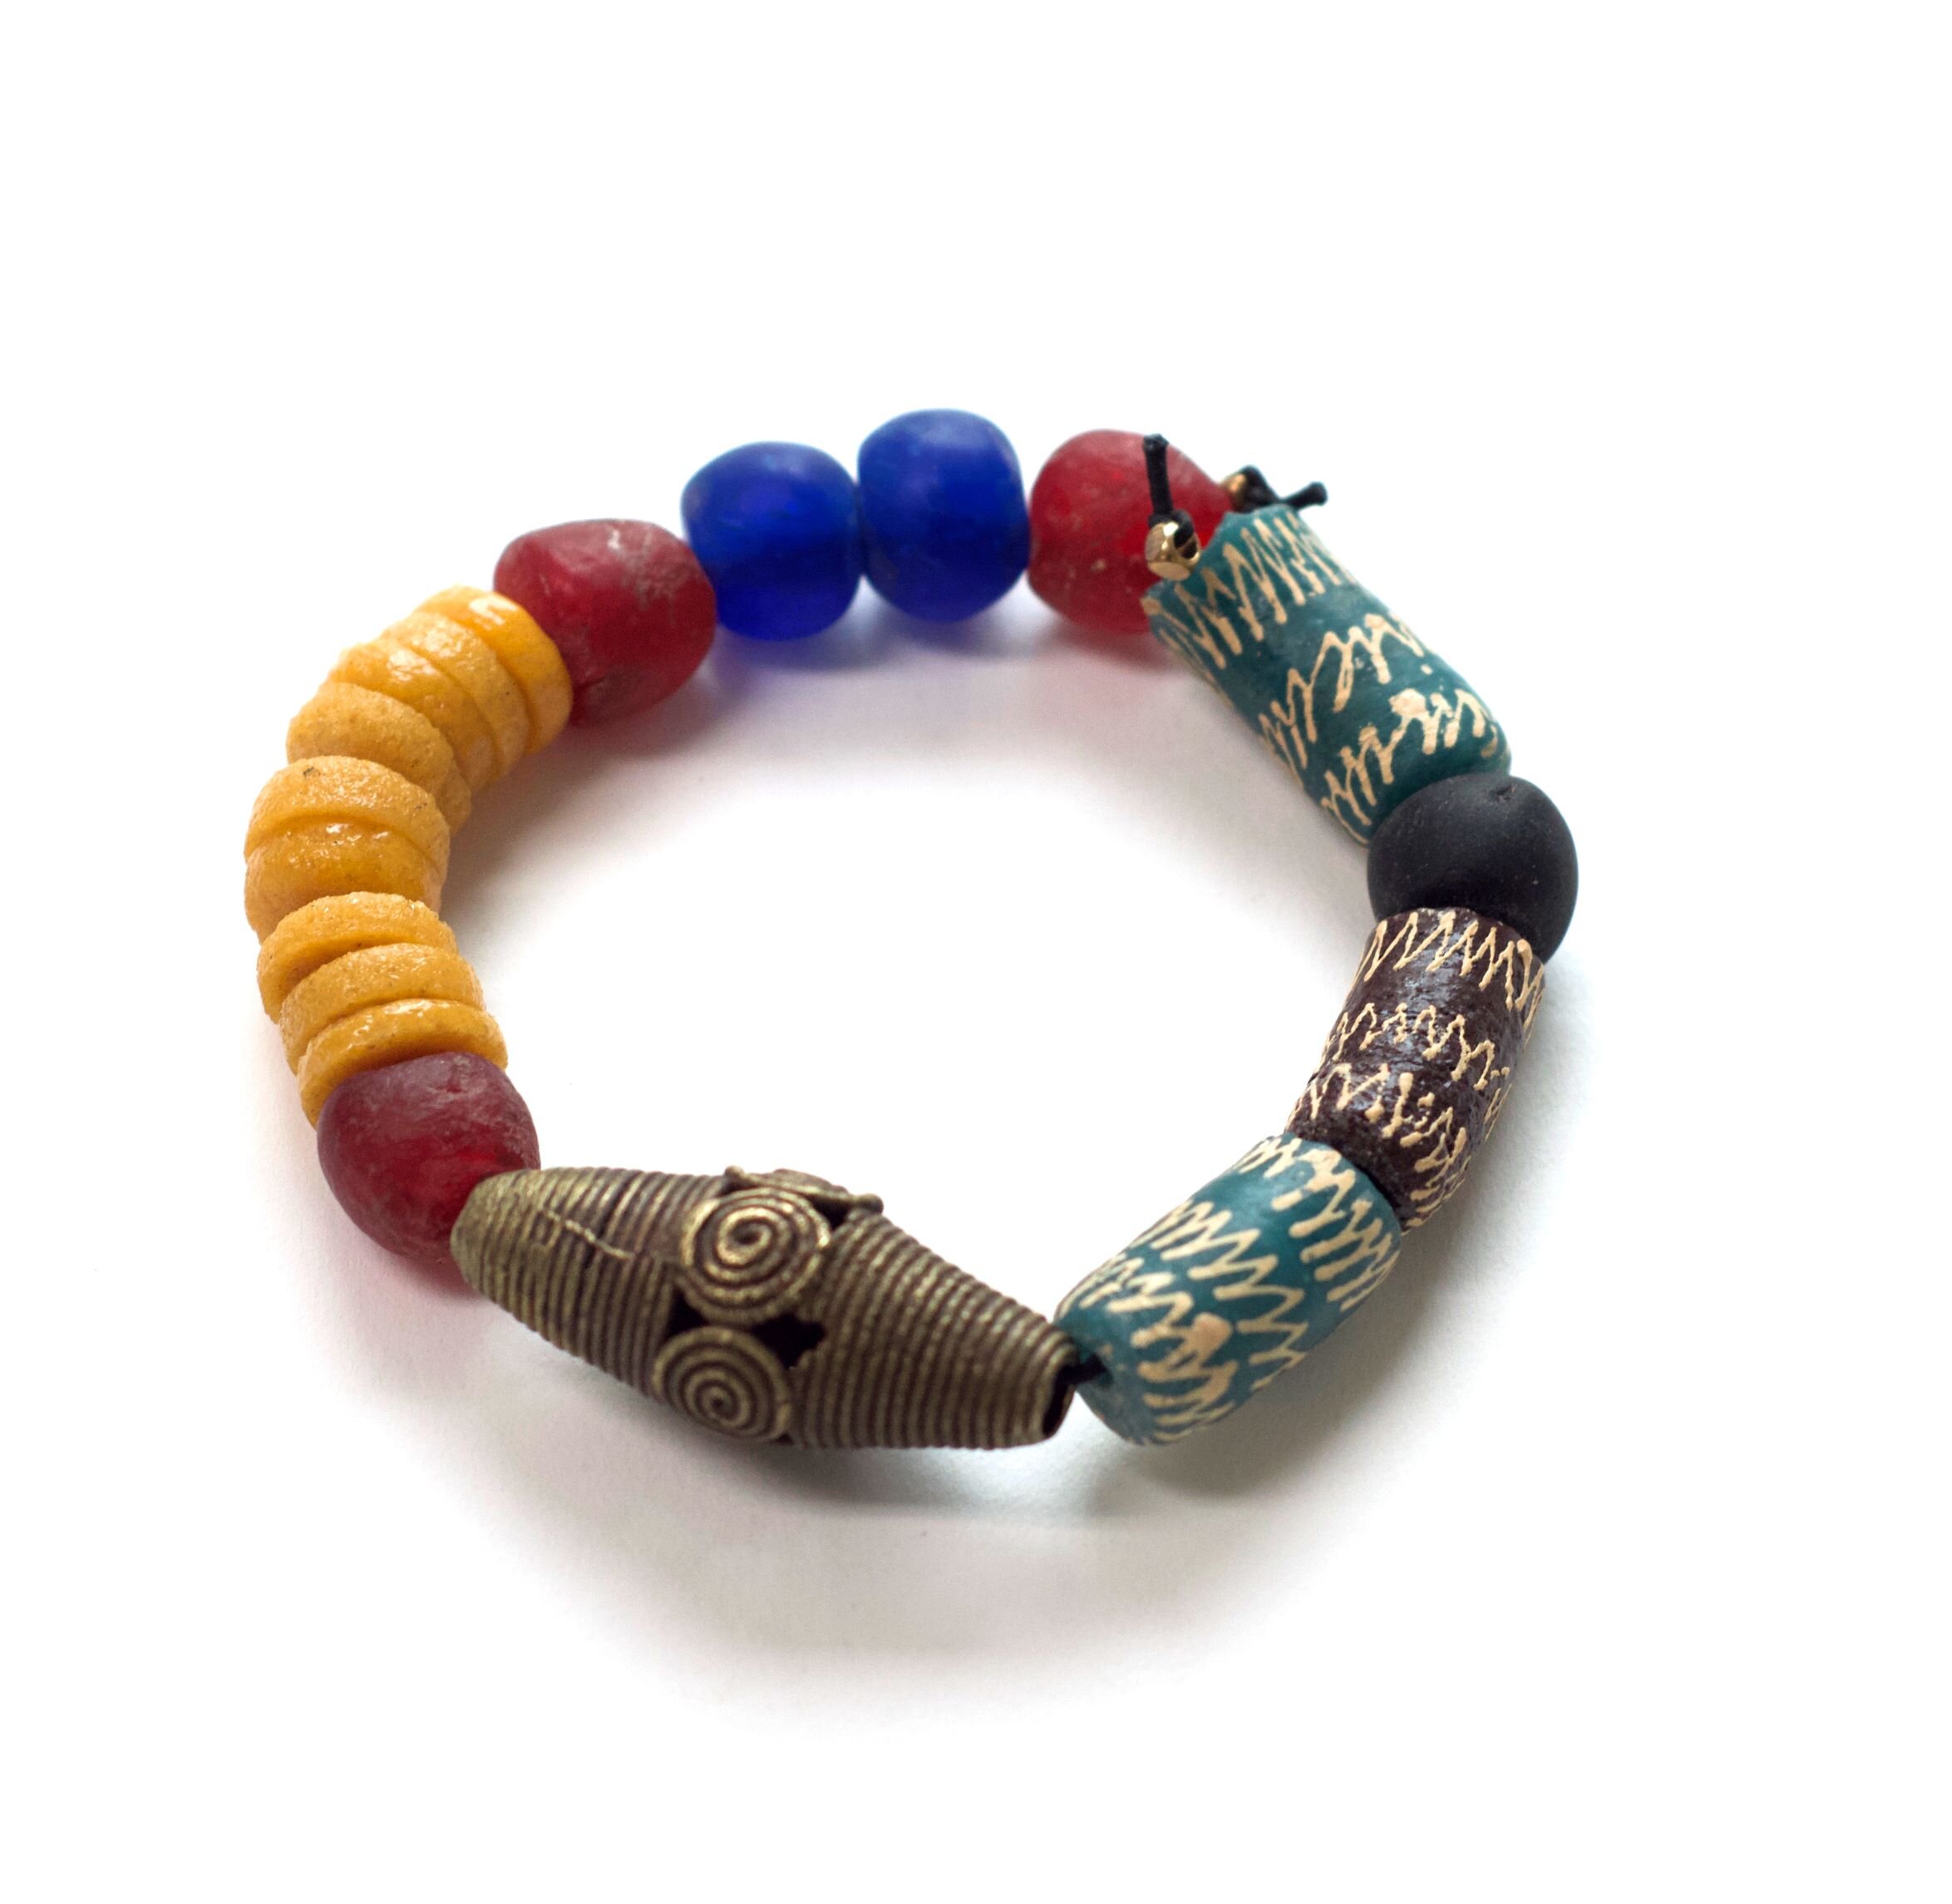 African Trade Bead Necklace and Bracelet Set, Statement Jewelry, Colorful  Beaded Necklace, Caribou Antler Button, Great Gift for Friend - Etsy  Singapore